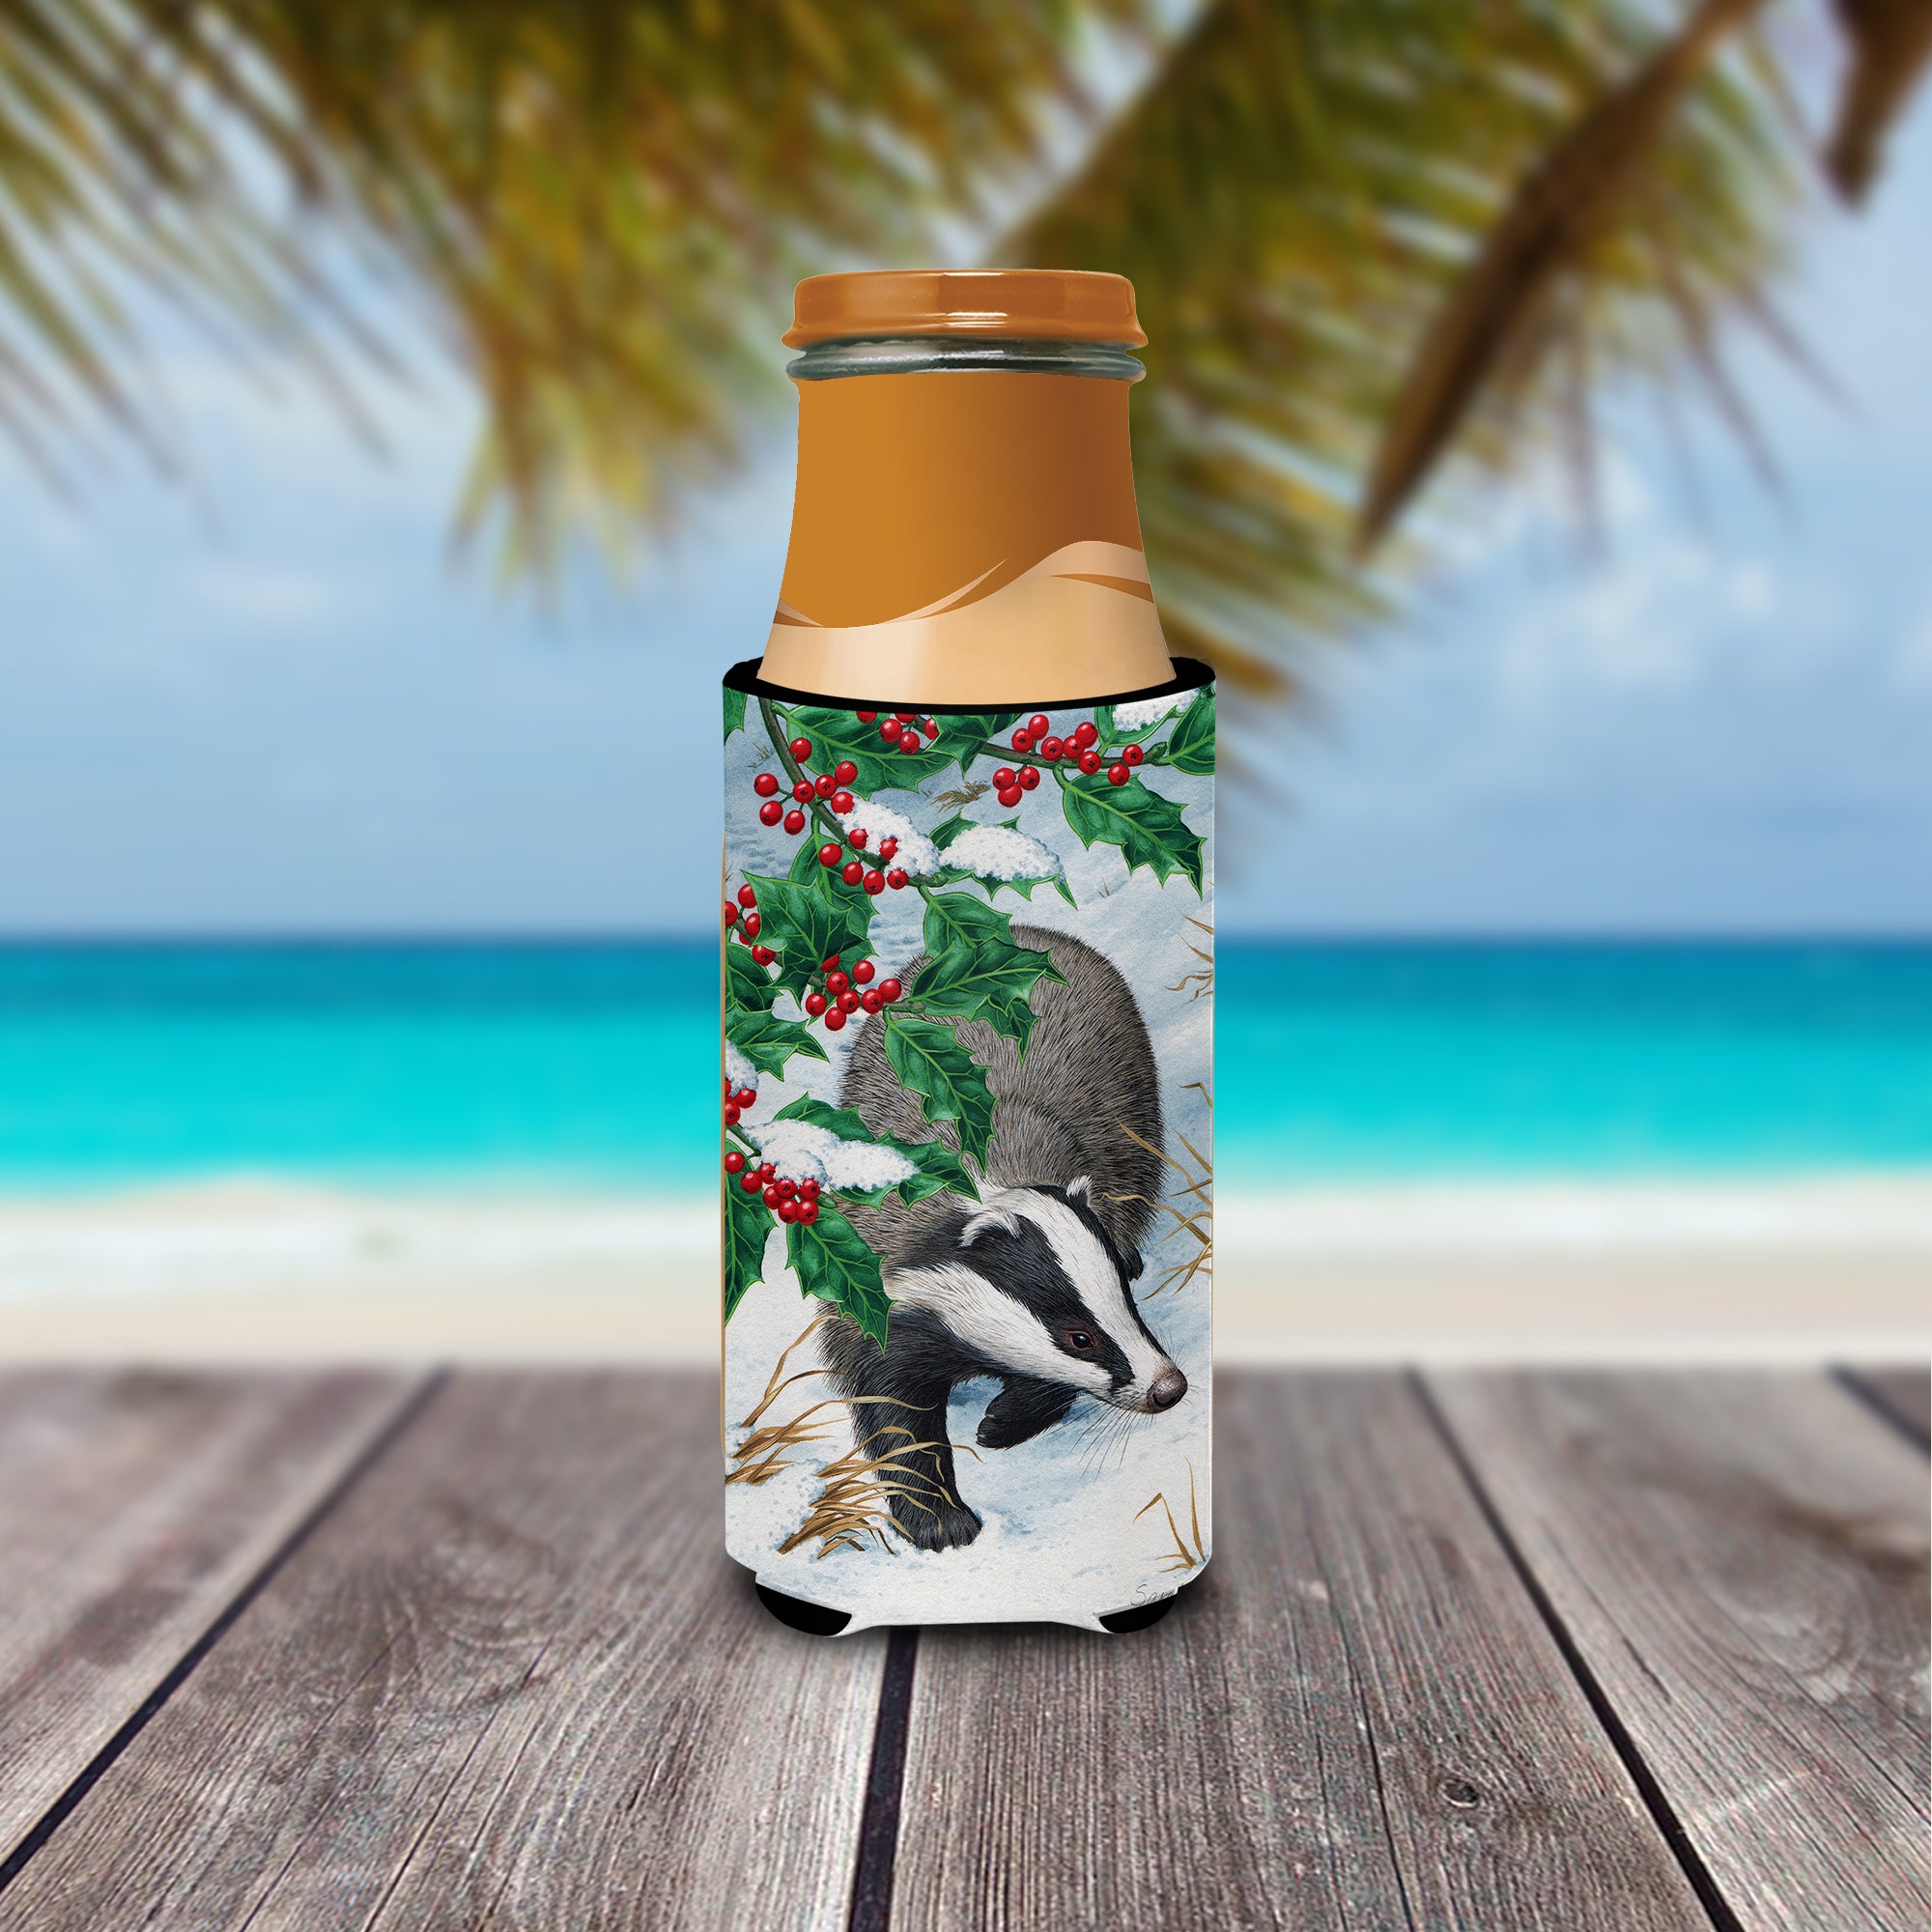 Badgers with Holly Berries Ultra Beverage Insulators for slim cans ASA2039MUK